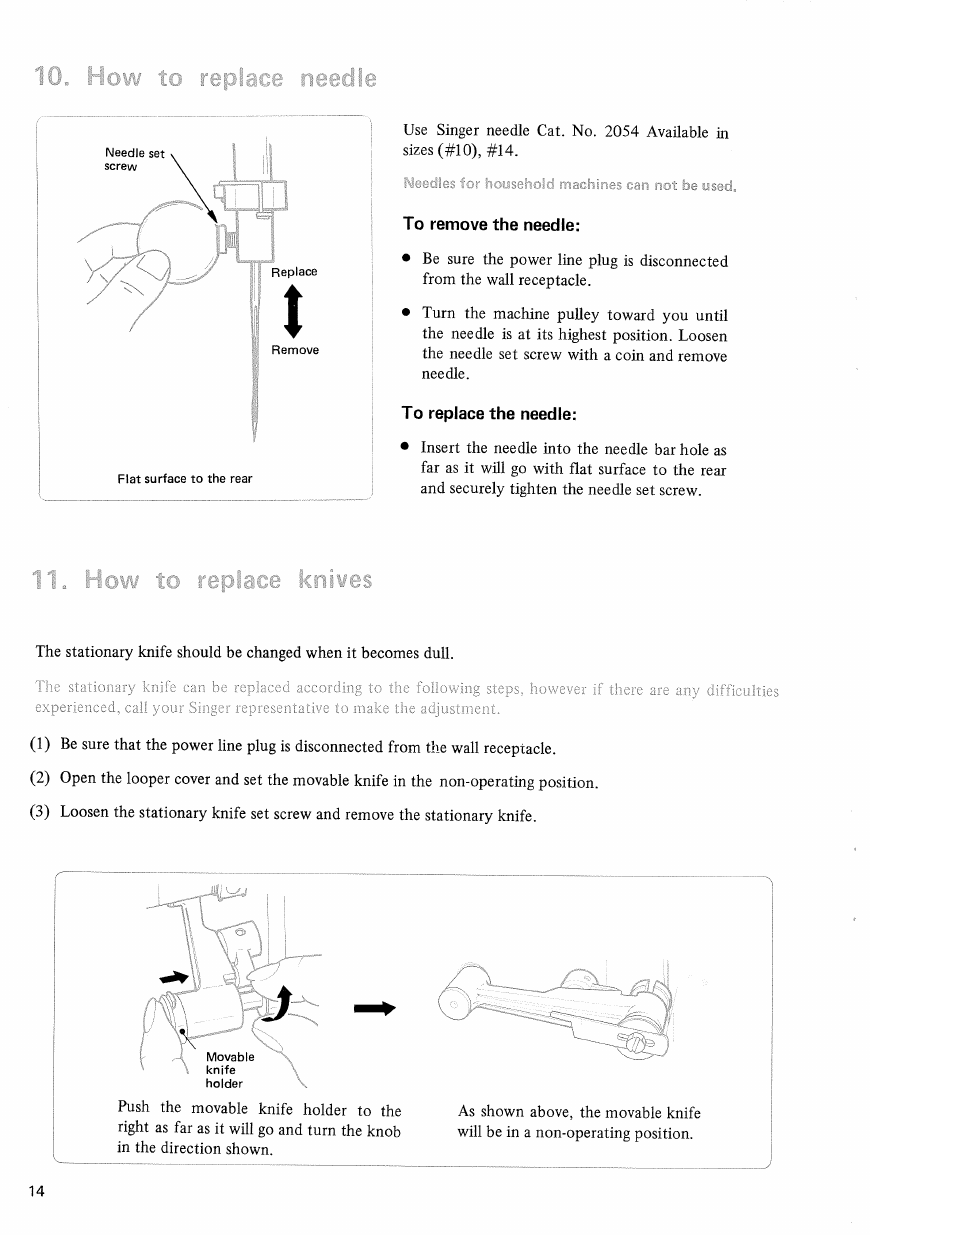 10, homi to replace needle, 11, how to replace kriices, How to replace needle | How to replace knives | SINGER 14U32A Ultralock User Manual | Page 16 / 24